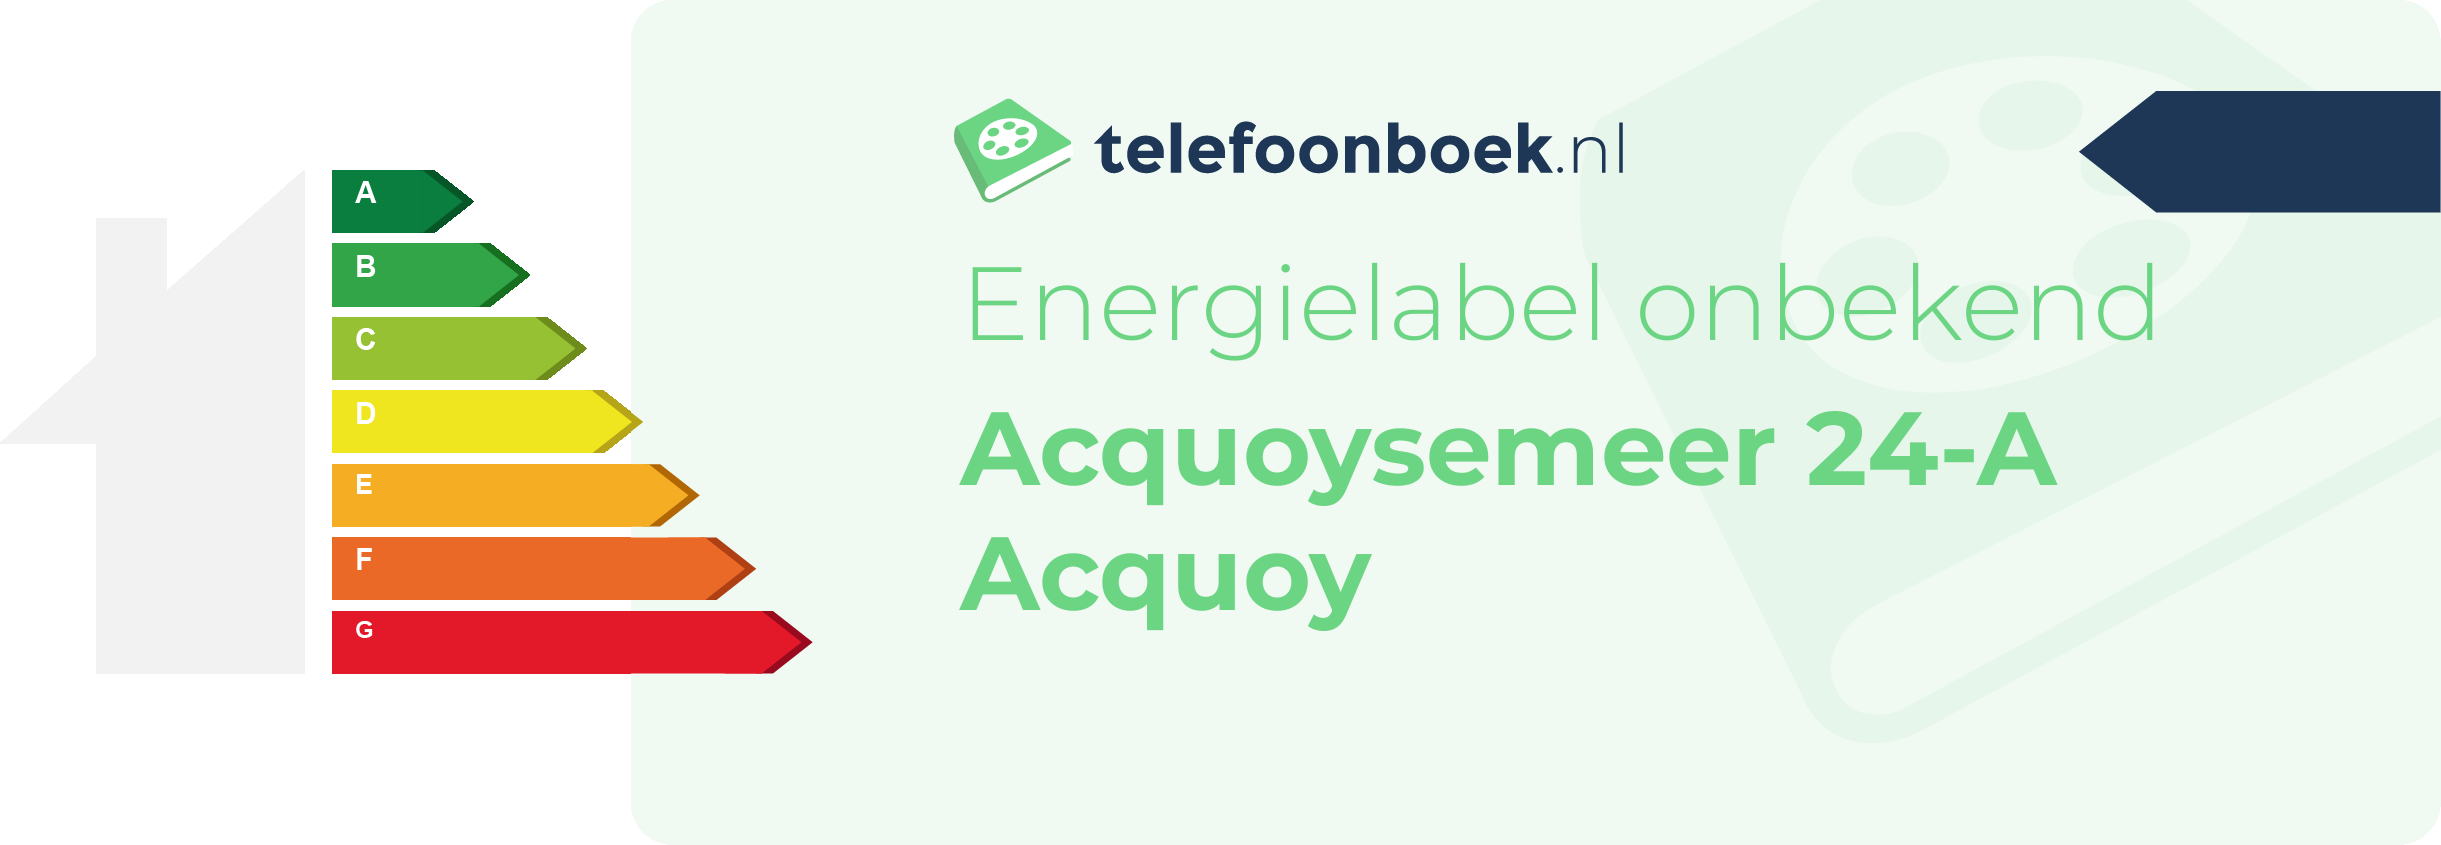 Energielabel Acquoysemeer 24-A Acquoy